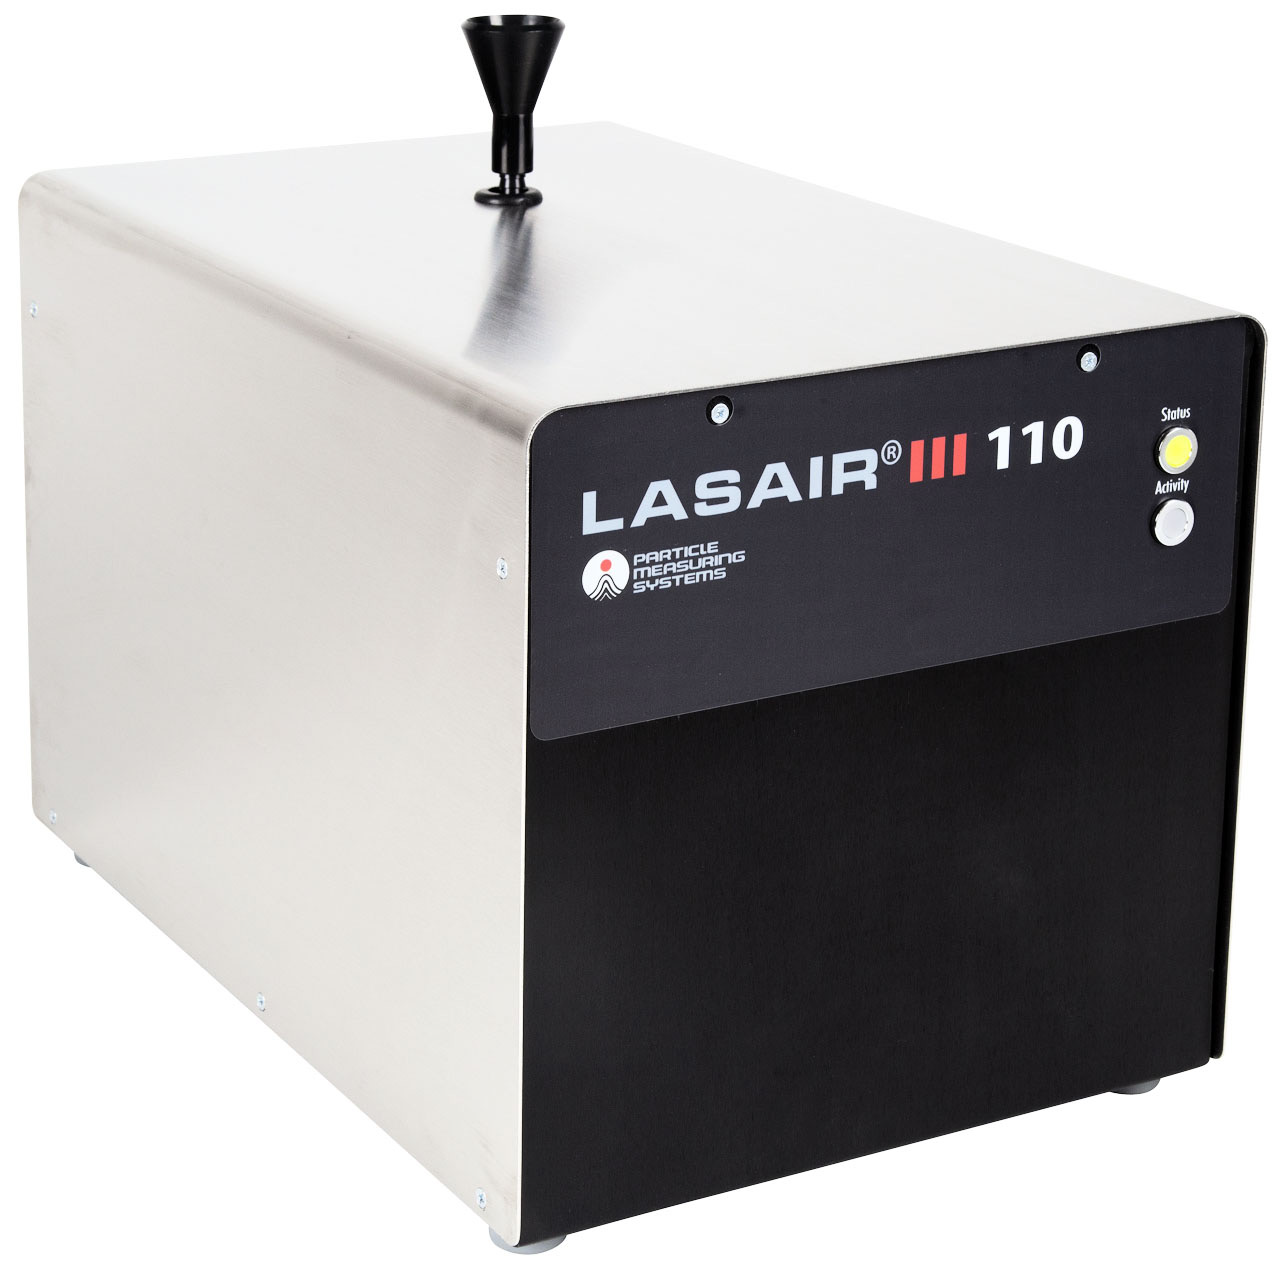 Lasair® III 110 Laser Diode-Based Particle Counter